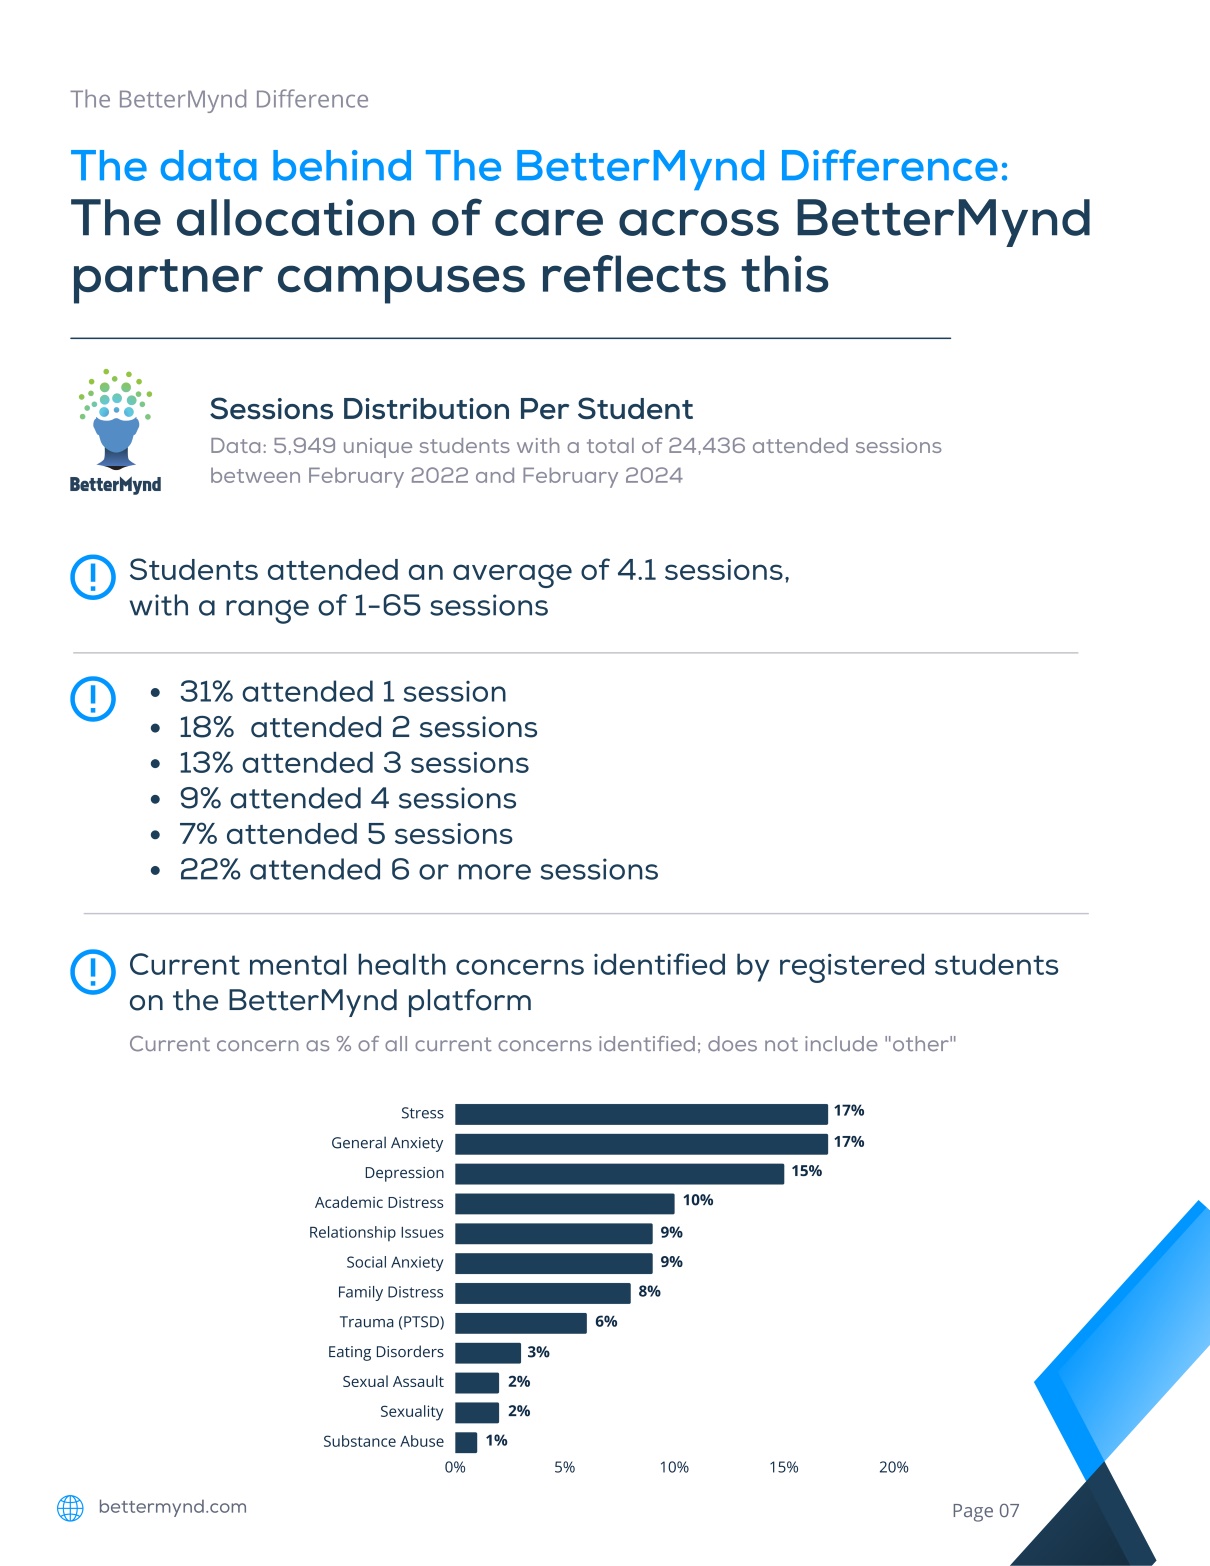 The allocation of care across BetterMynd partner campuses reflects this